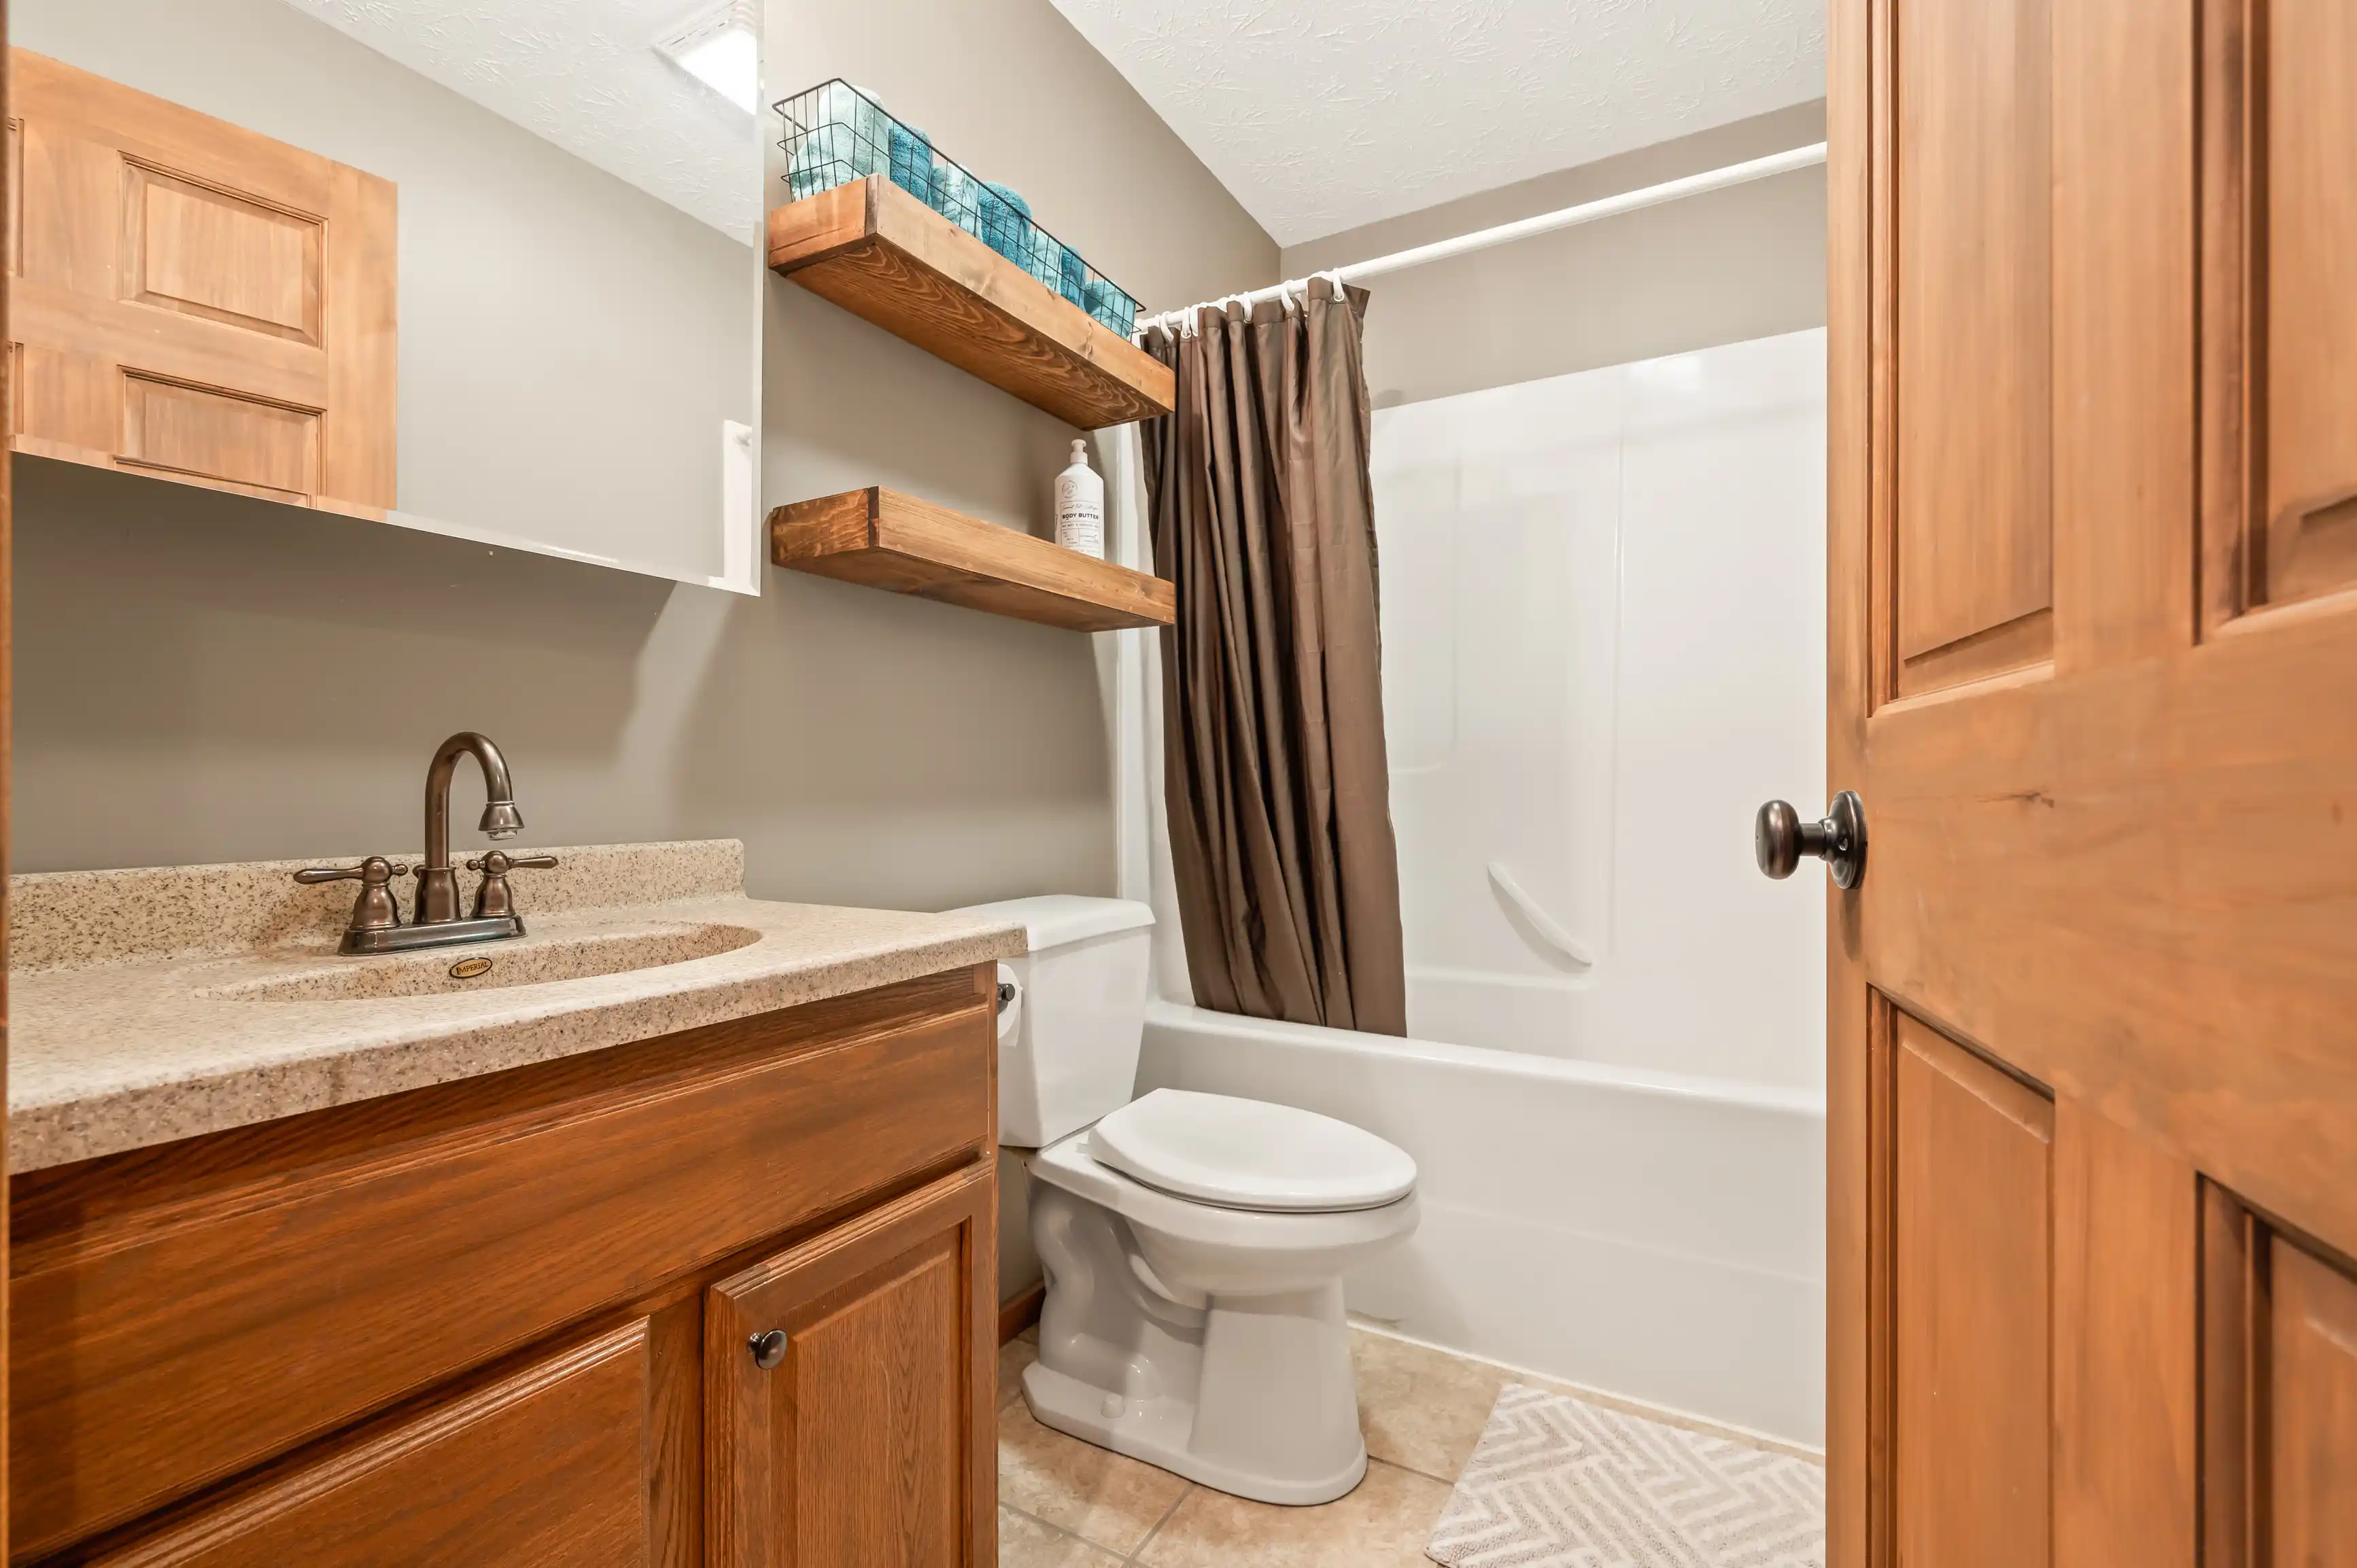 A modern bathroom with wooden cabinetry, granite countertop with undermount sink, two floating shelves above the toilet, and a shower-tub combo with a brown curtain.